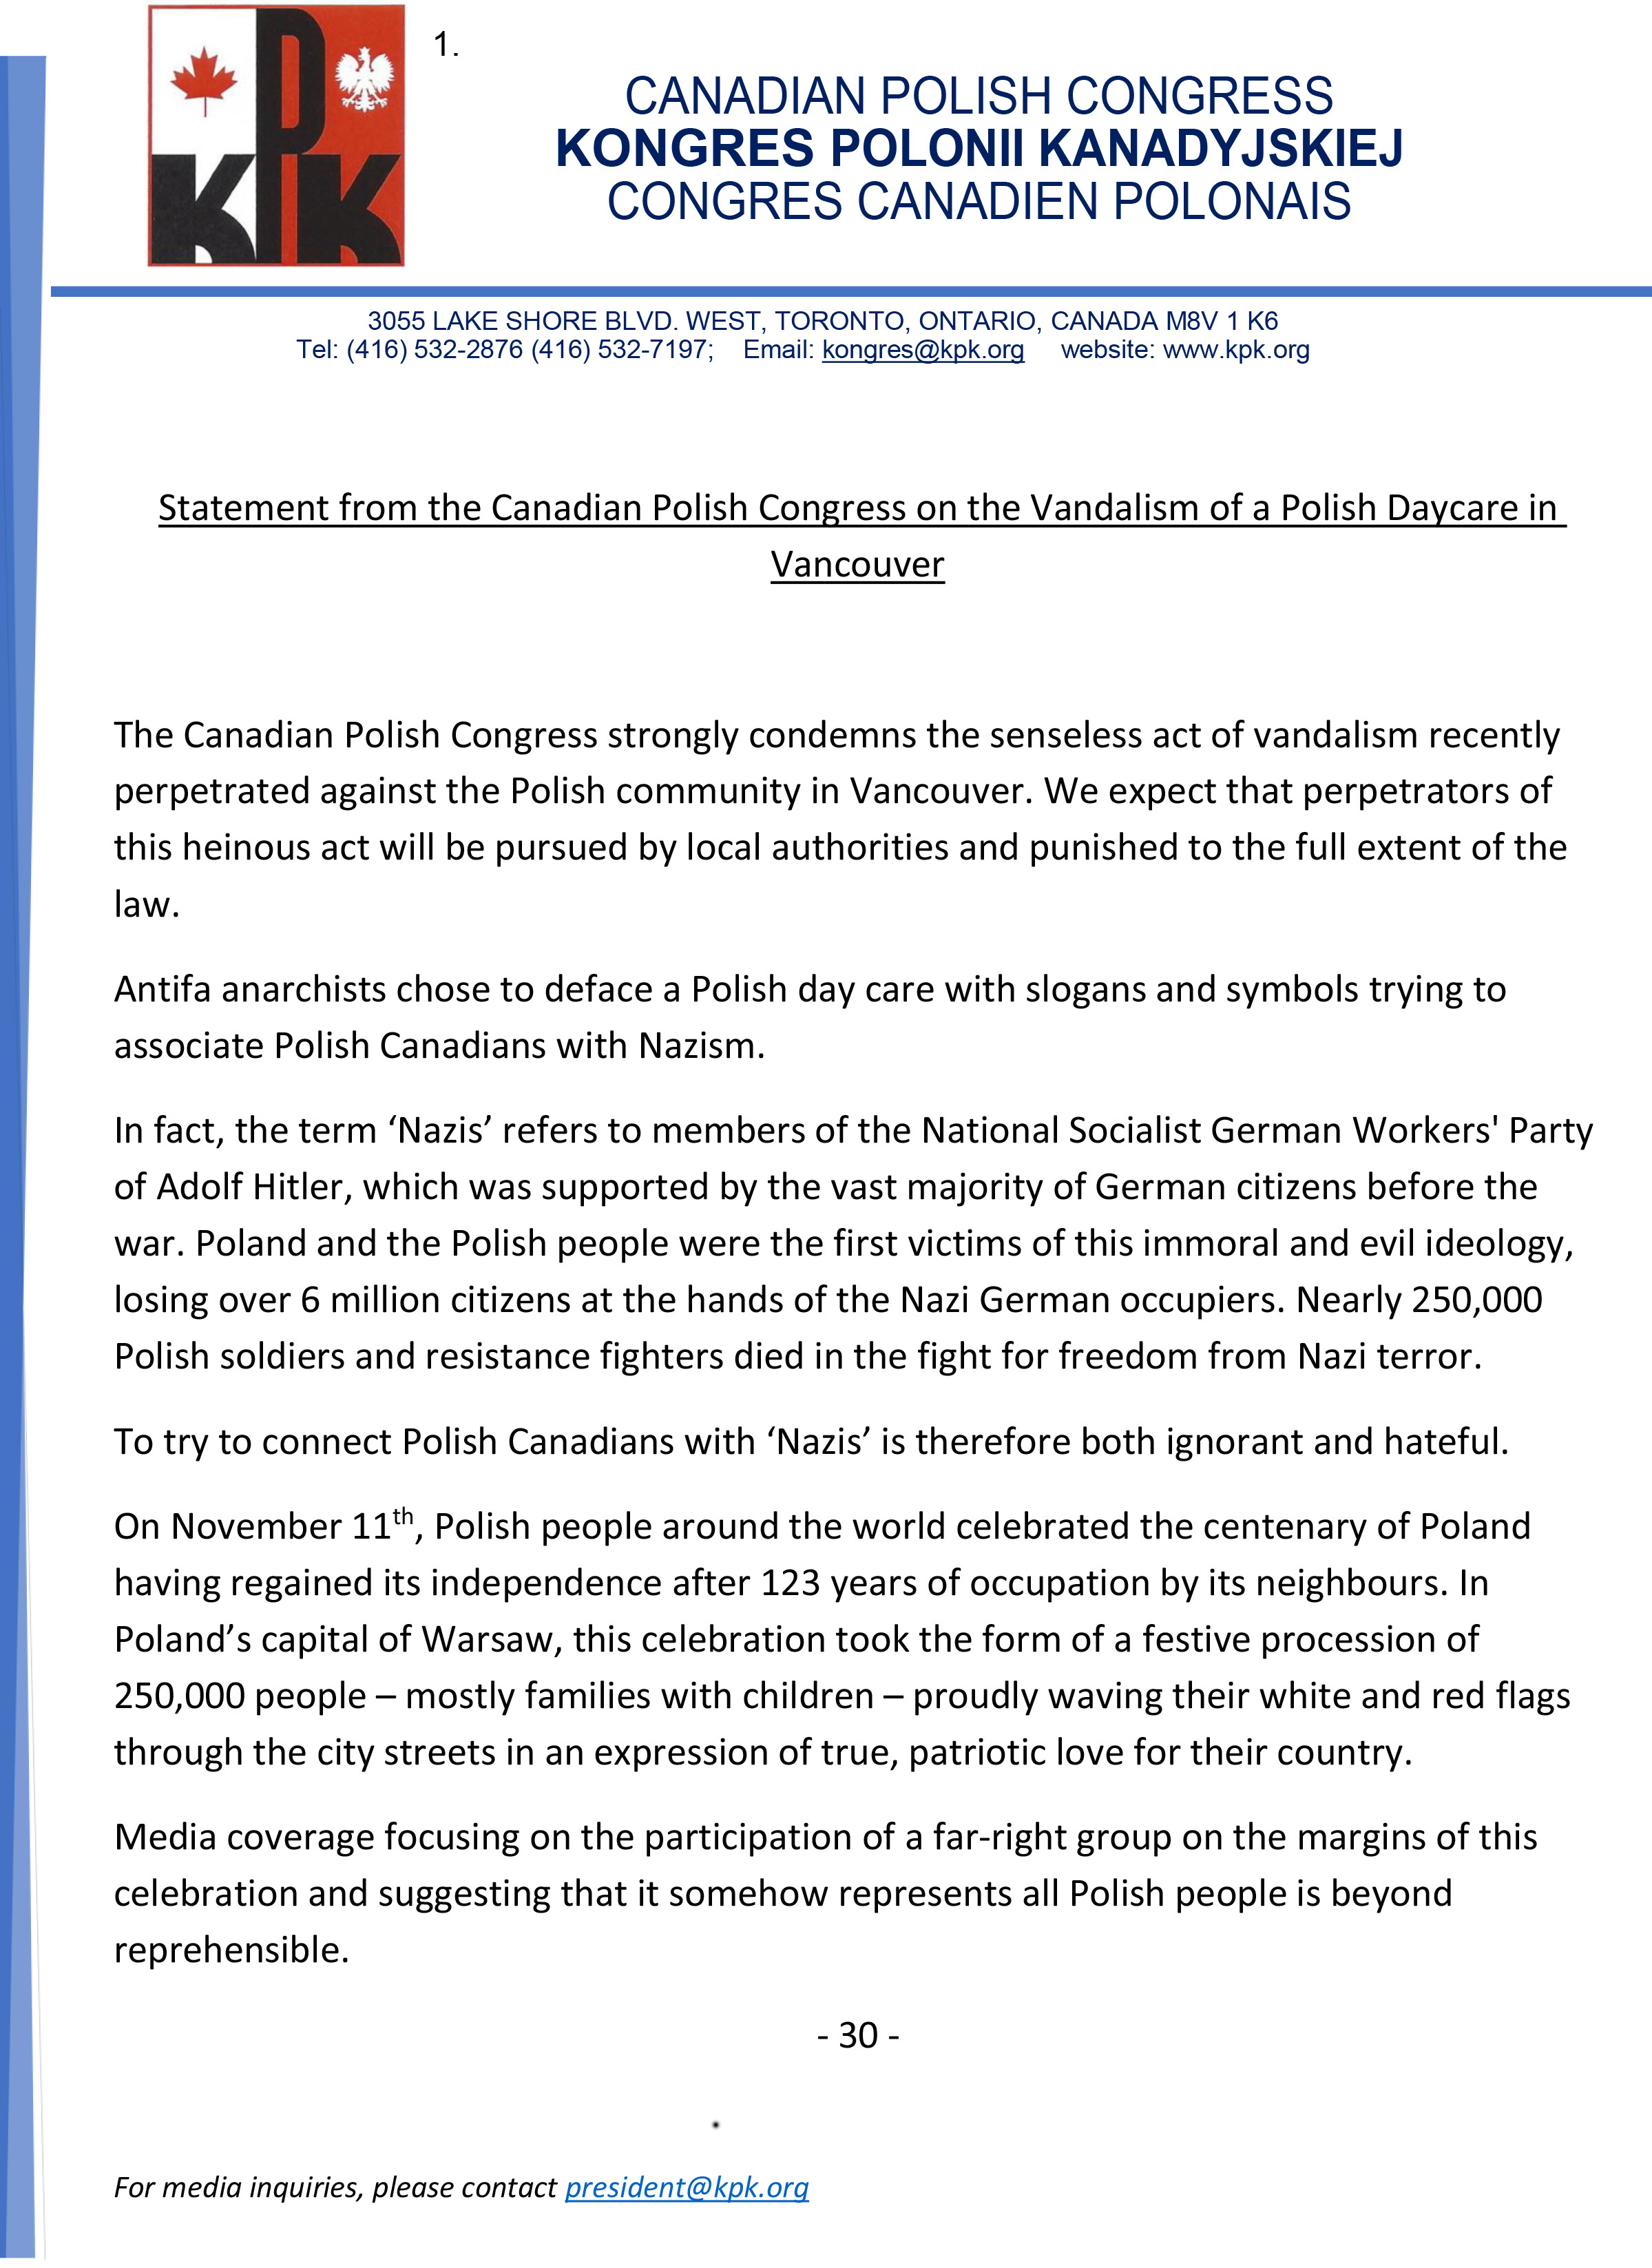 CPC Statement on Vandalism of Polish Daycare in Vancouver